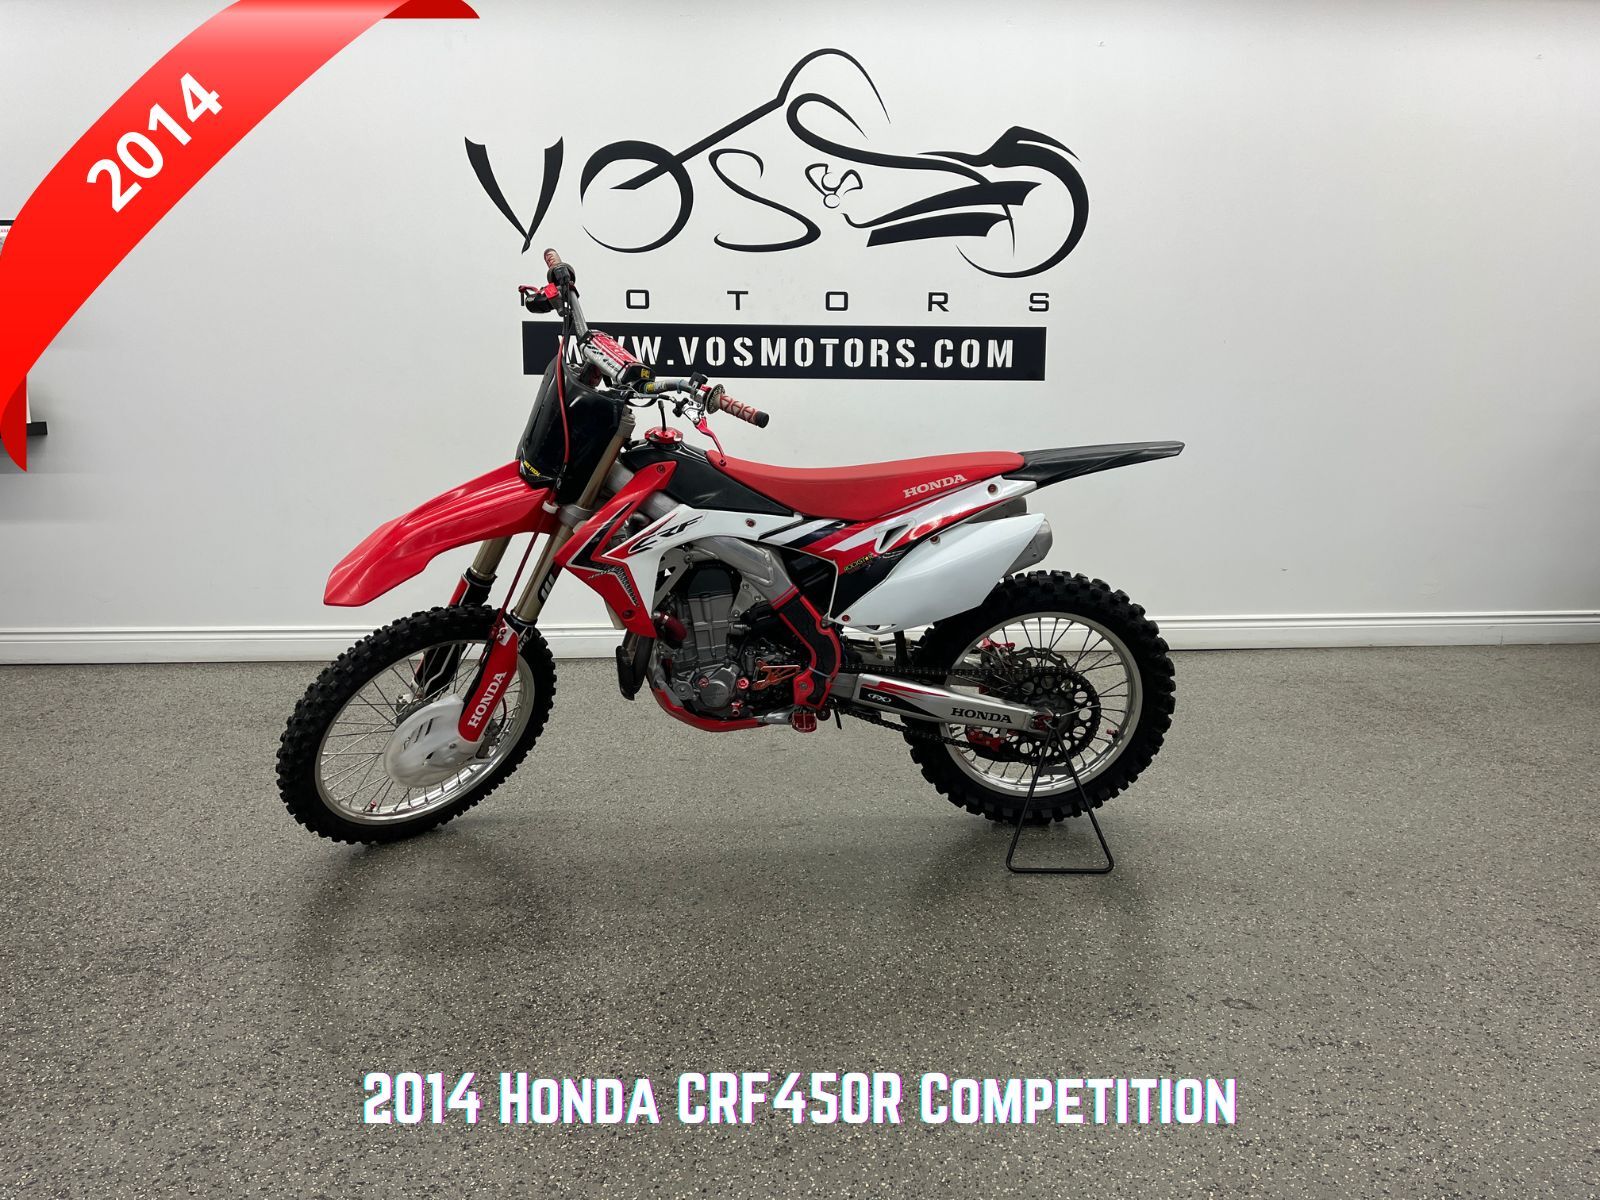 2014 Honda CRF450R Competition